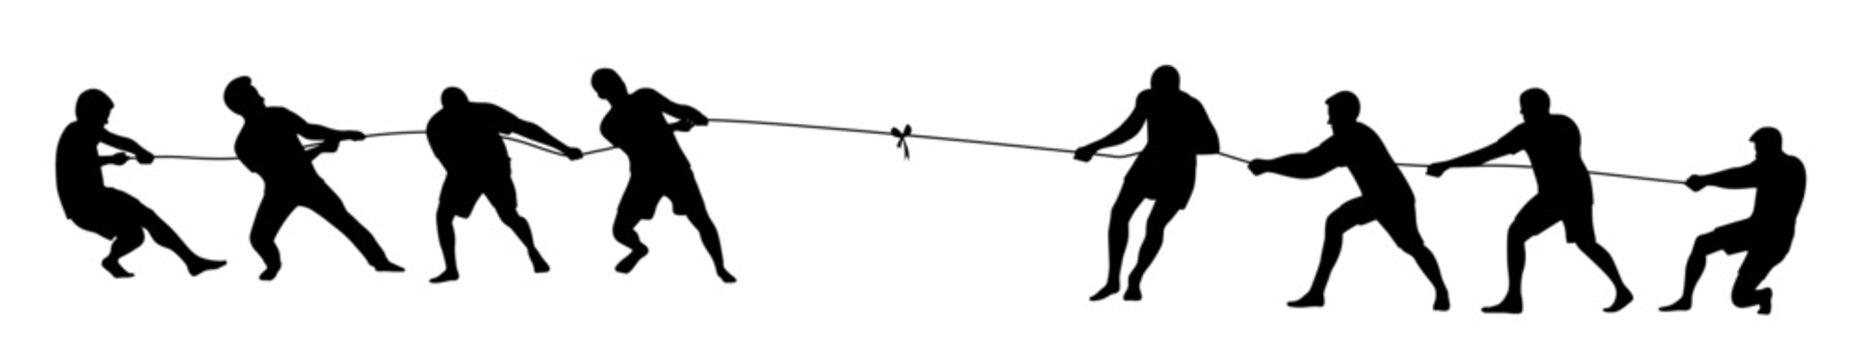 Man  team pulling a rope in tug of war silhouette, concept of compete, teamwork, Teams Playing Tug Of War